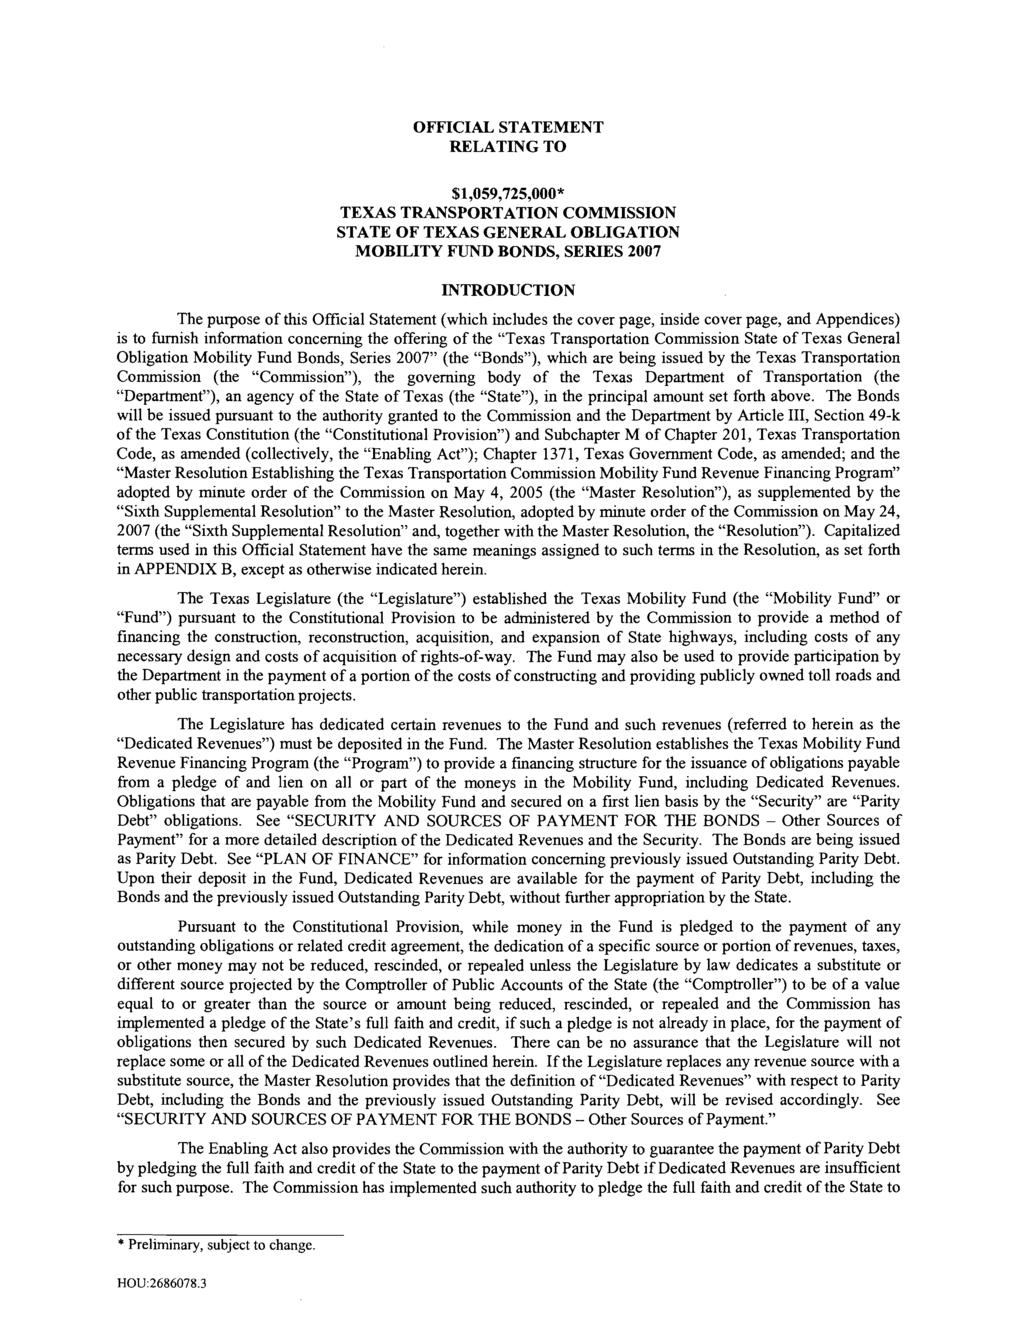 OFFICIAL STATEMENT RELATING TO $1,059,725,000* TEXAS TRANSPORTATION COMMISSION STATE OF TEXAS GENERAL OBLIGATION MOBILITY FUND BONDS, SERIES 2007 INTRODUCTION The purpose of thls Official Statement